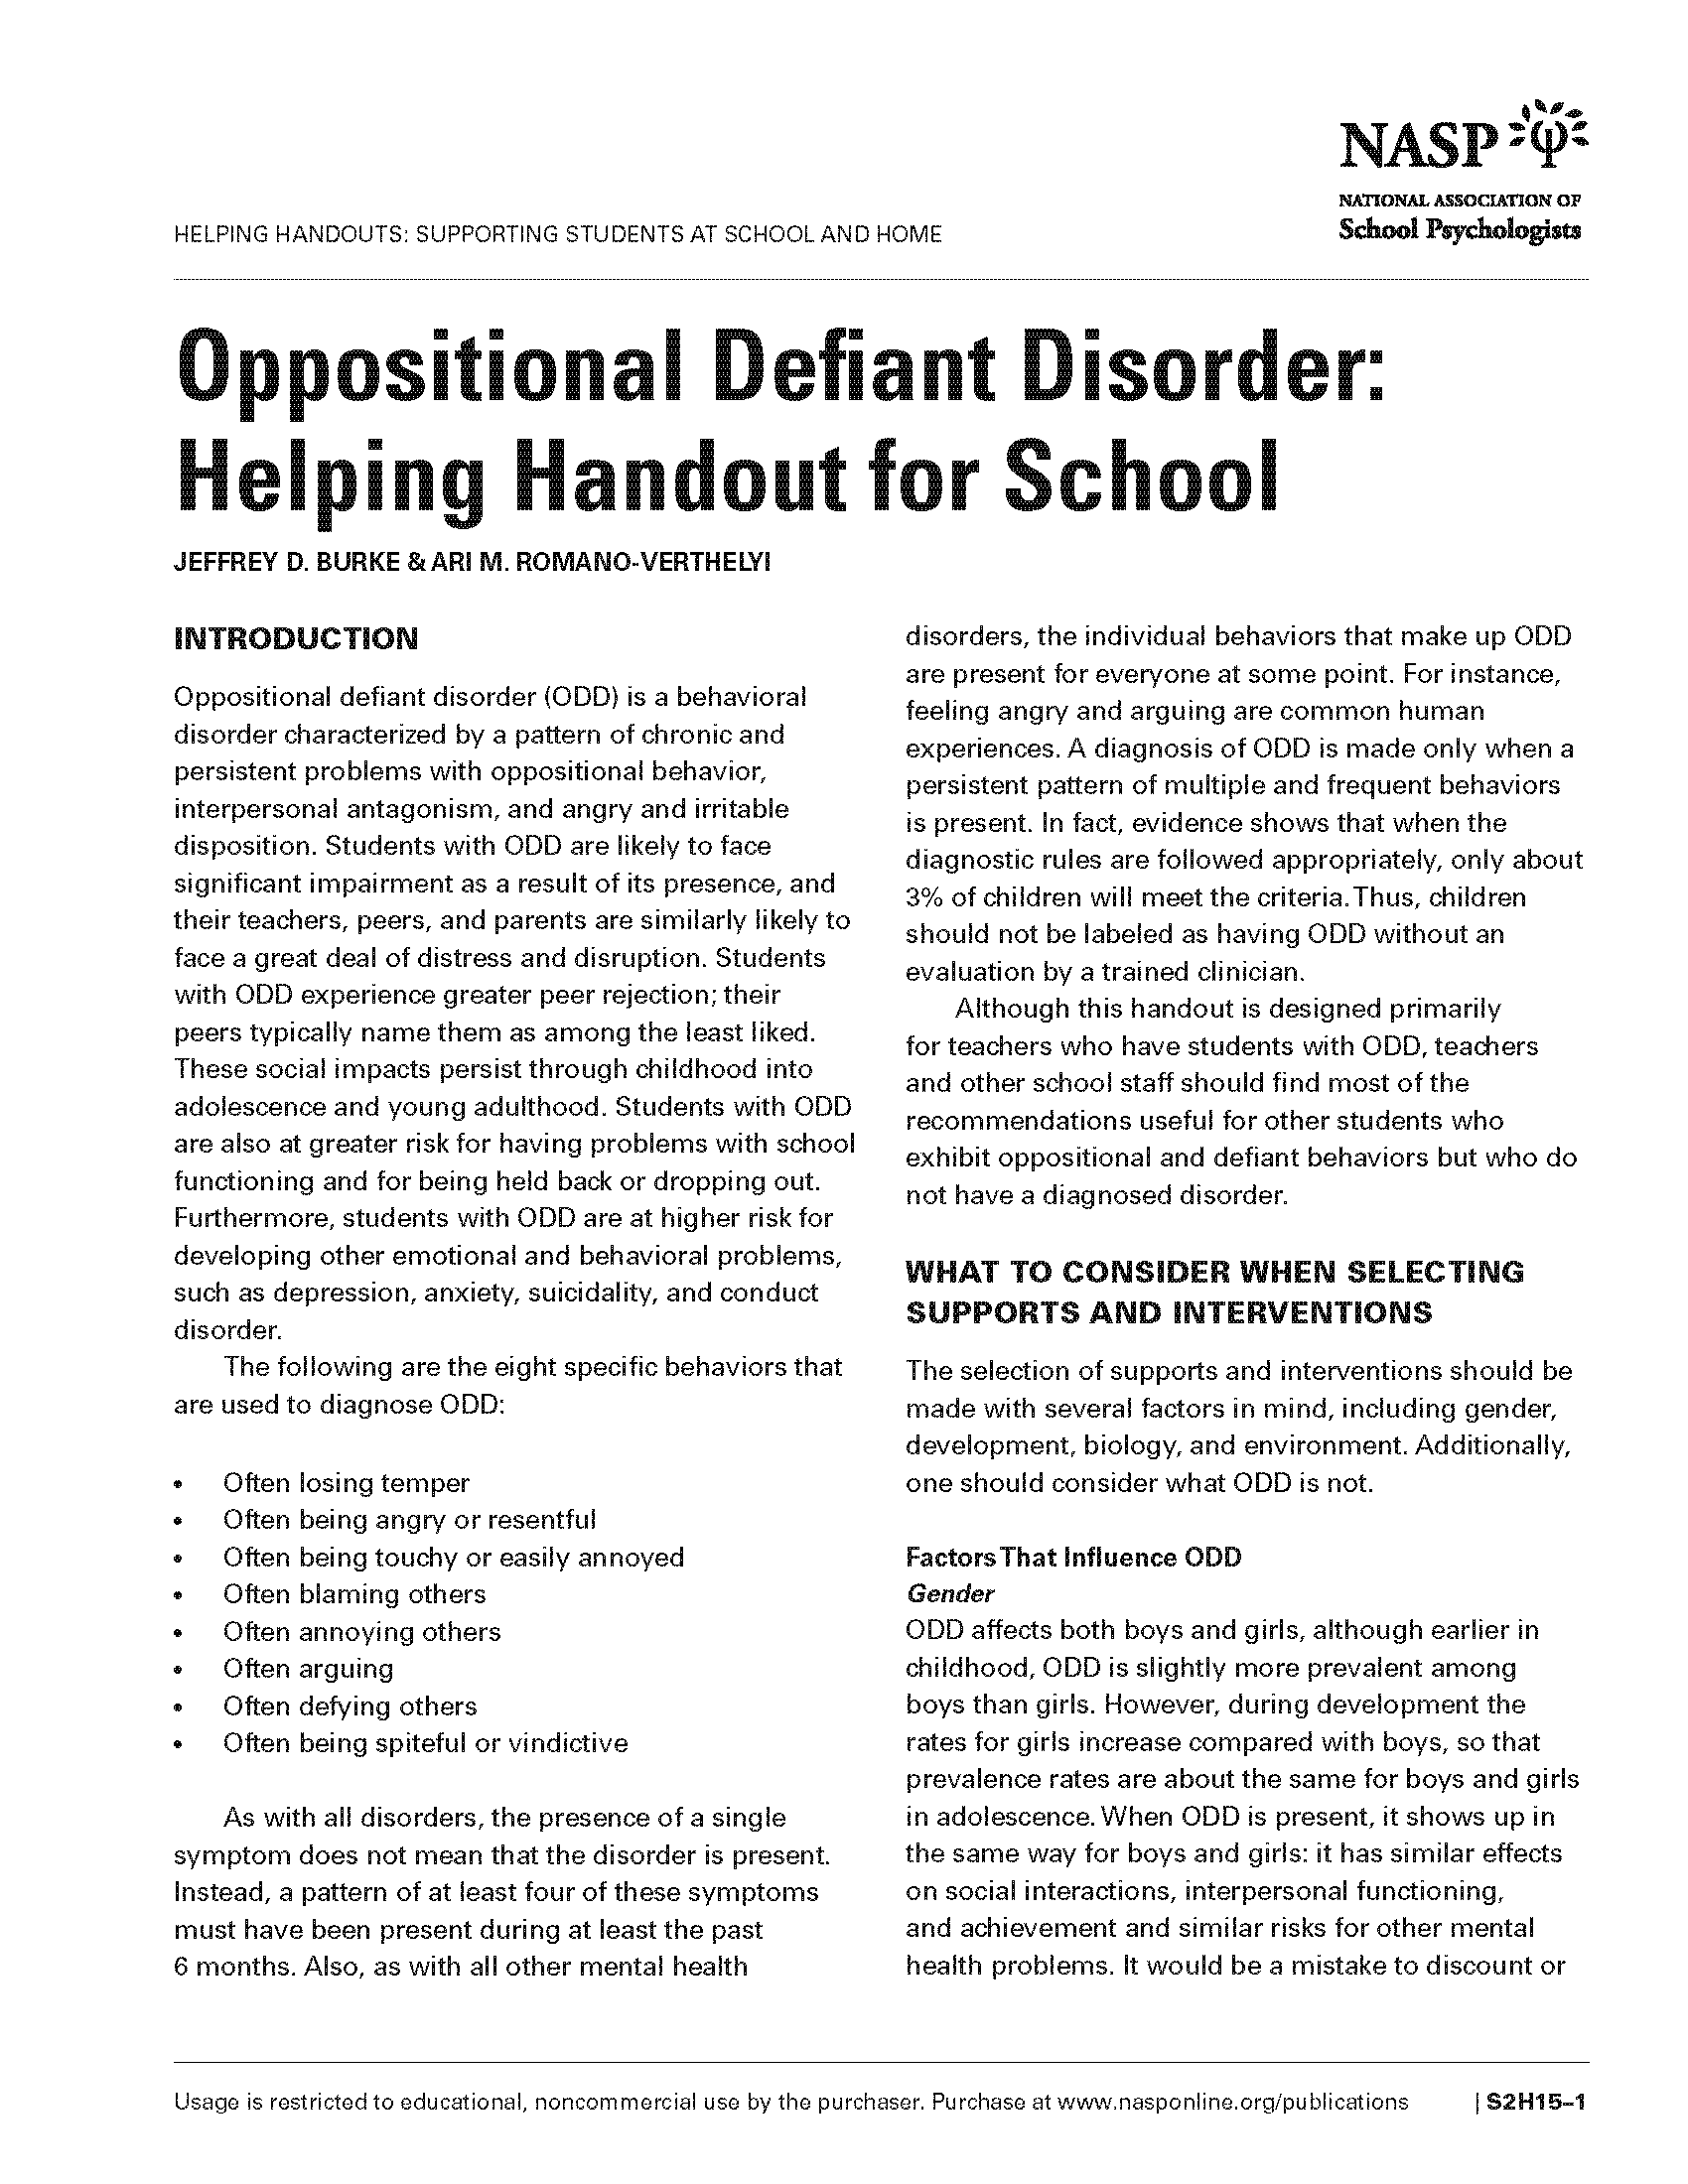 Oppositional Defiant Disorder: Helping Handout for School       